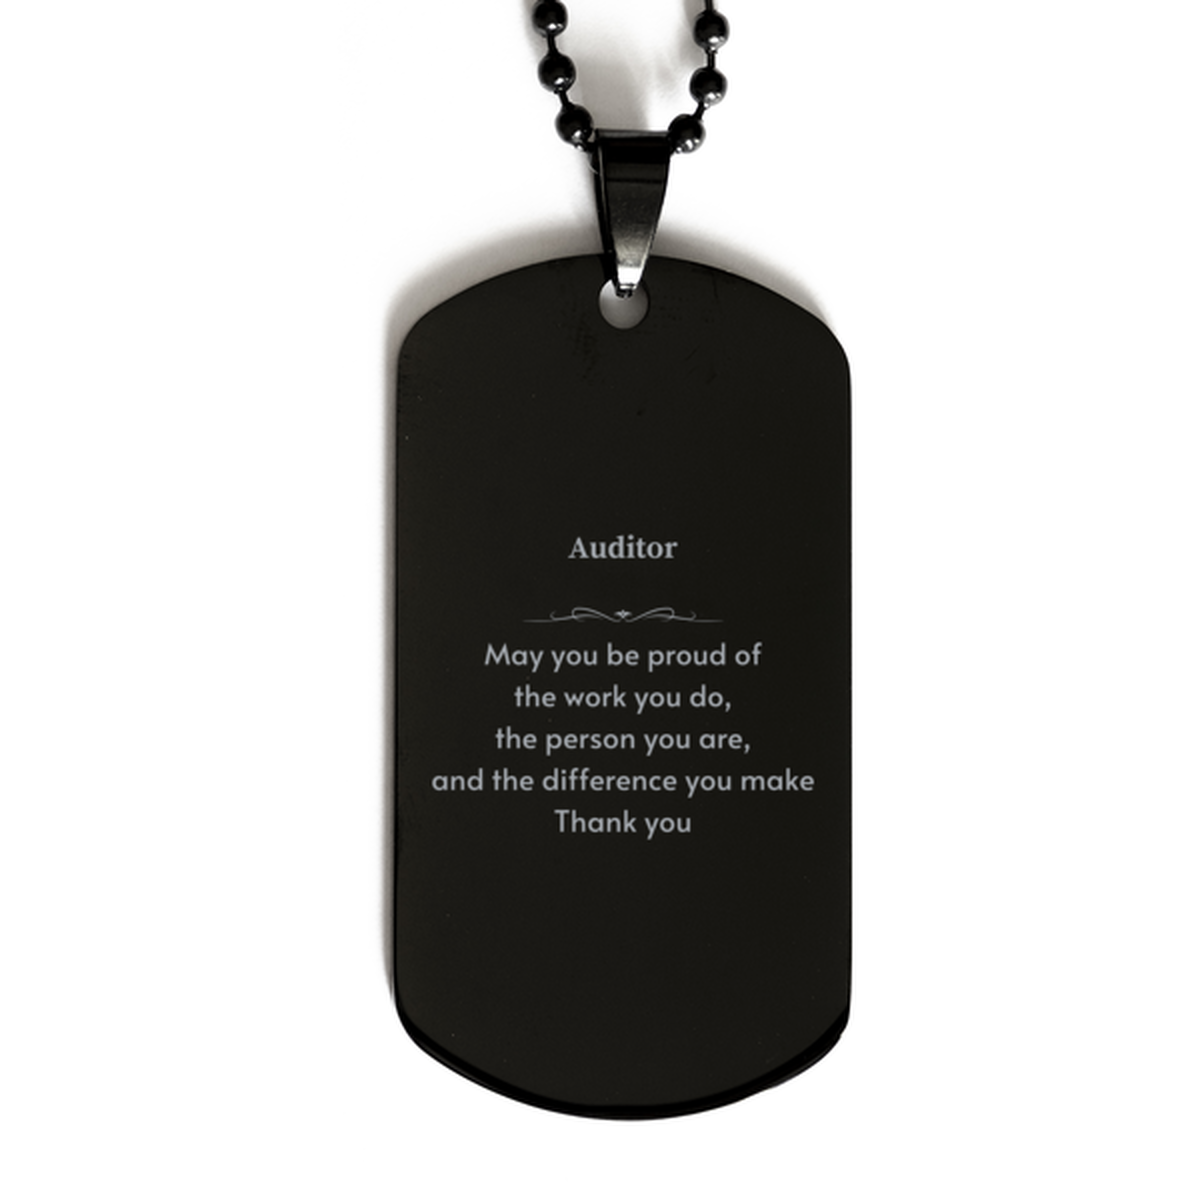 Heartwarming Black Dog Tag Retirement Coworkers Gifts for Auditor, Auditor May You be proud of the work you do, the person you are Gifts for Boss Men Women Friends